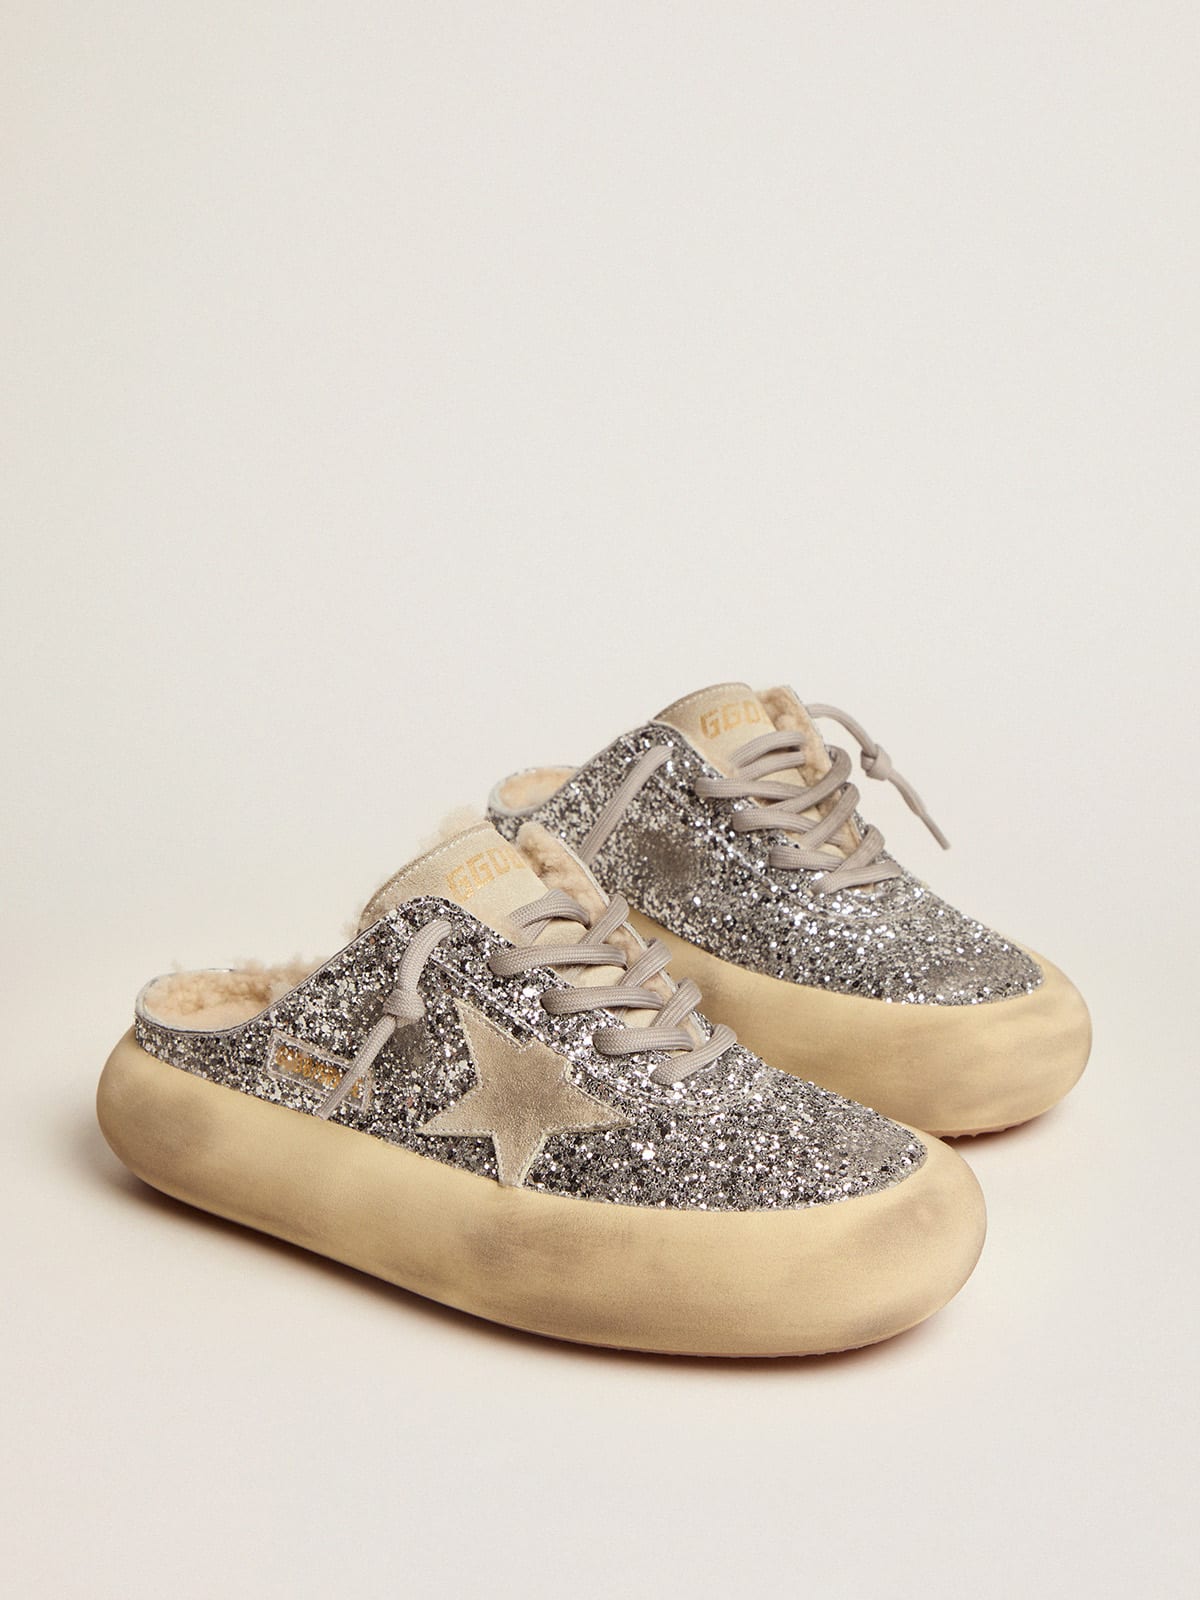 Golden Goose - Space-Star Sabot shoes in silver glitter with shearling lining in 